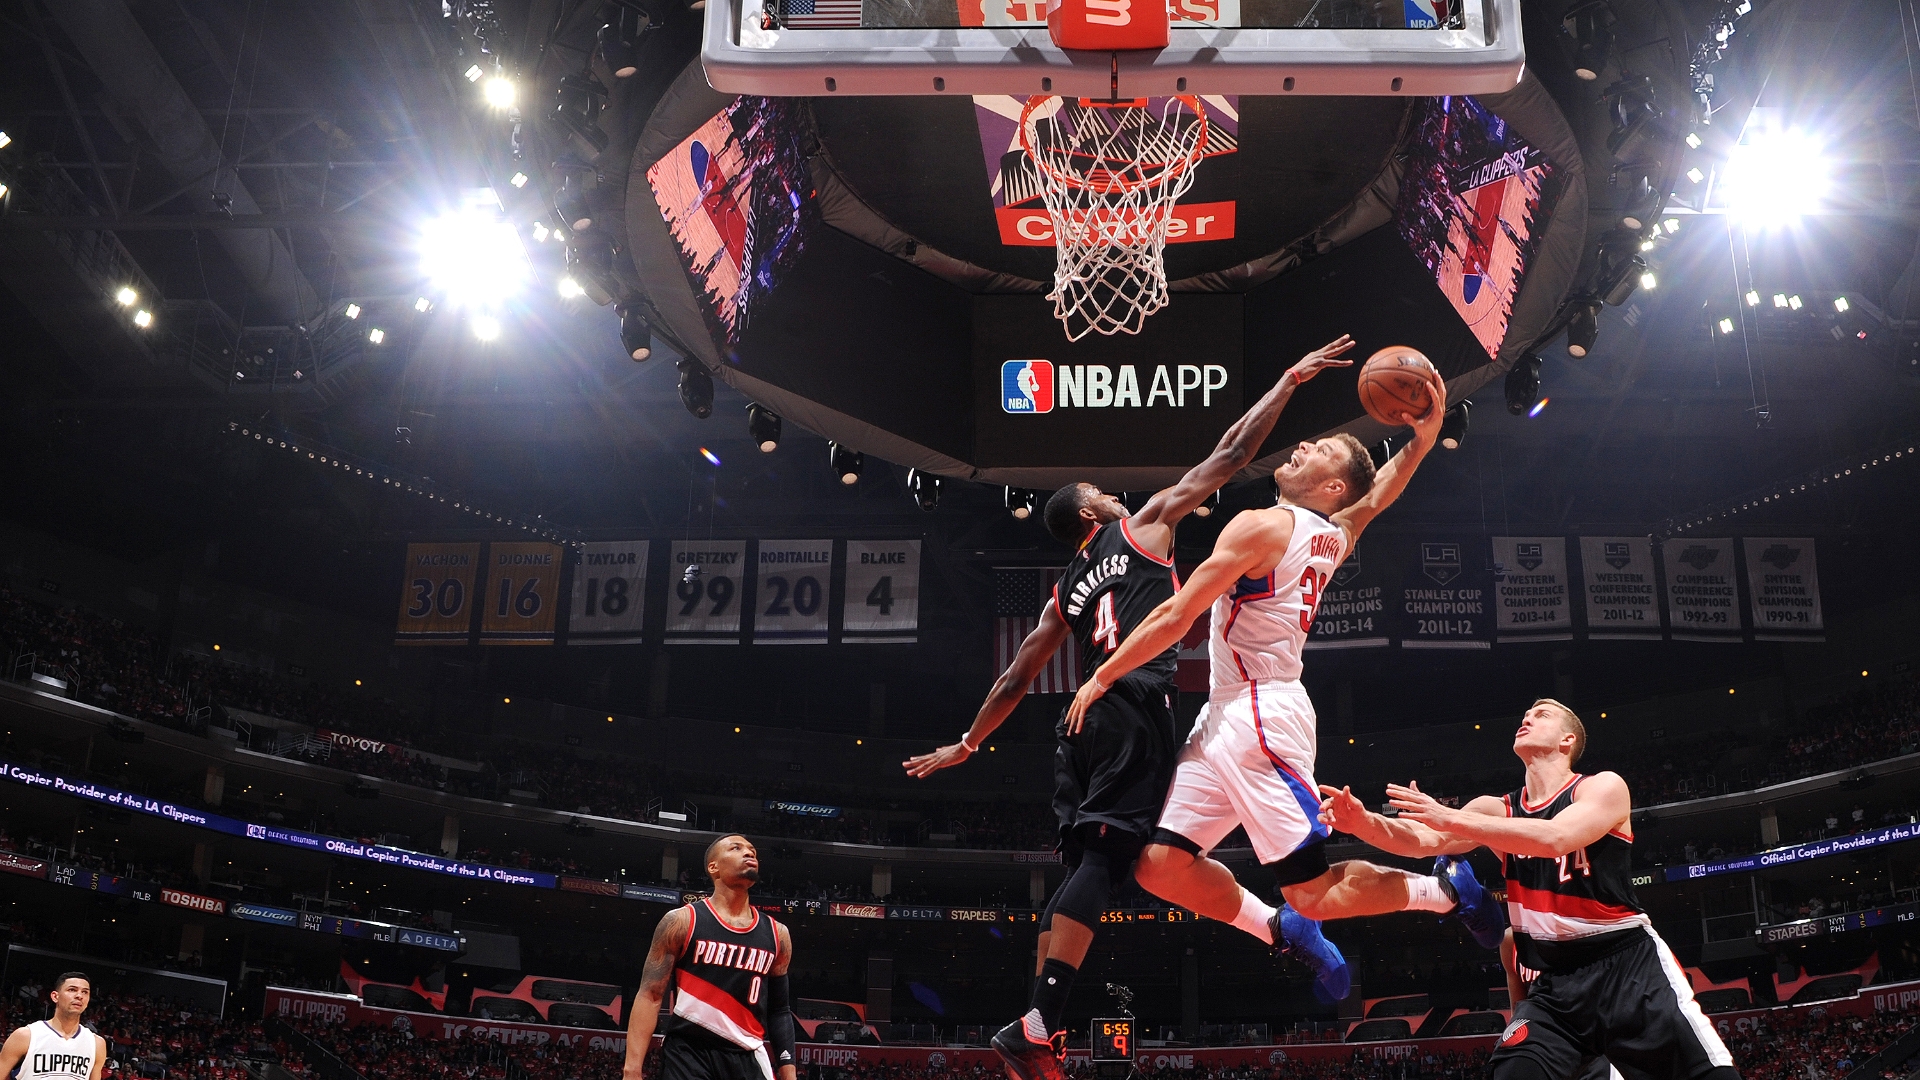 The best plays of Blake Griffin's NBA career